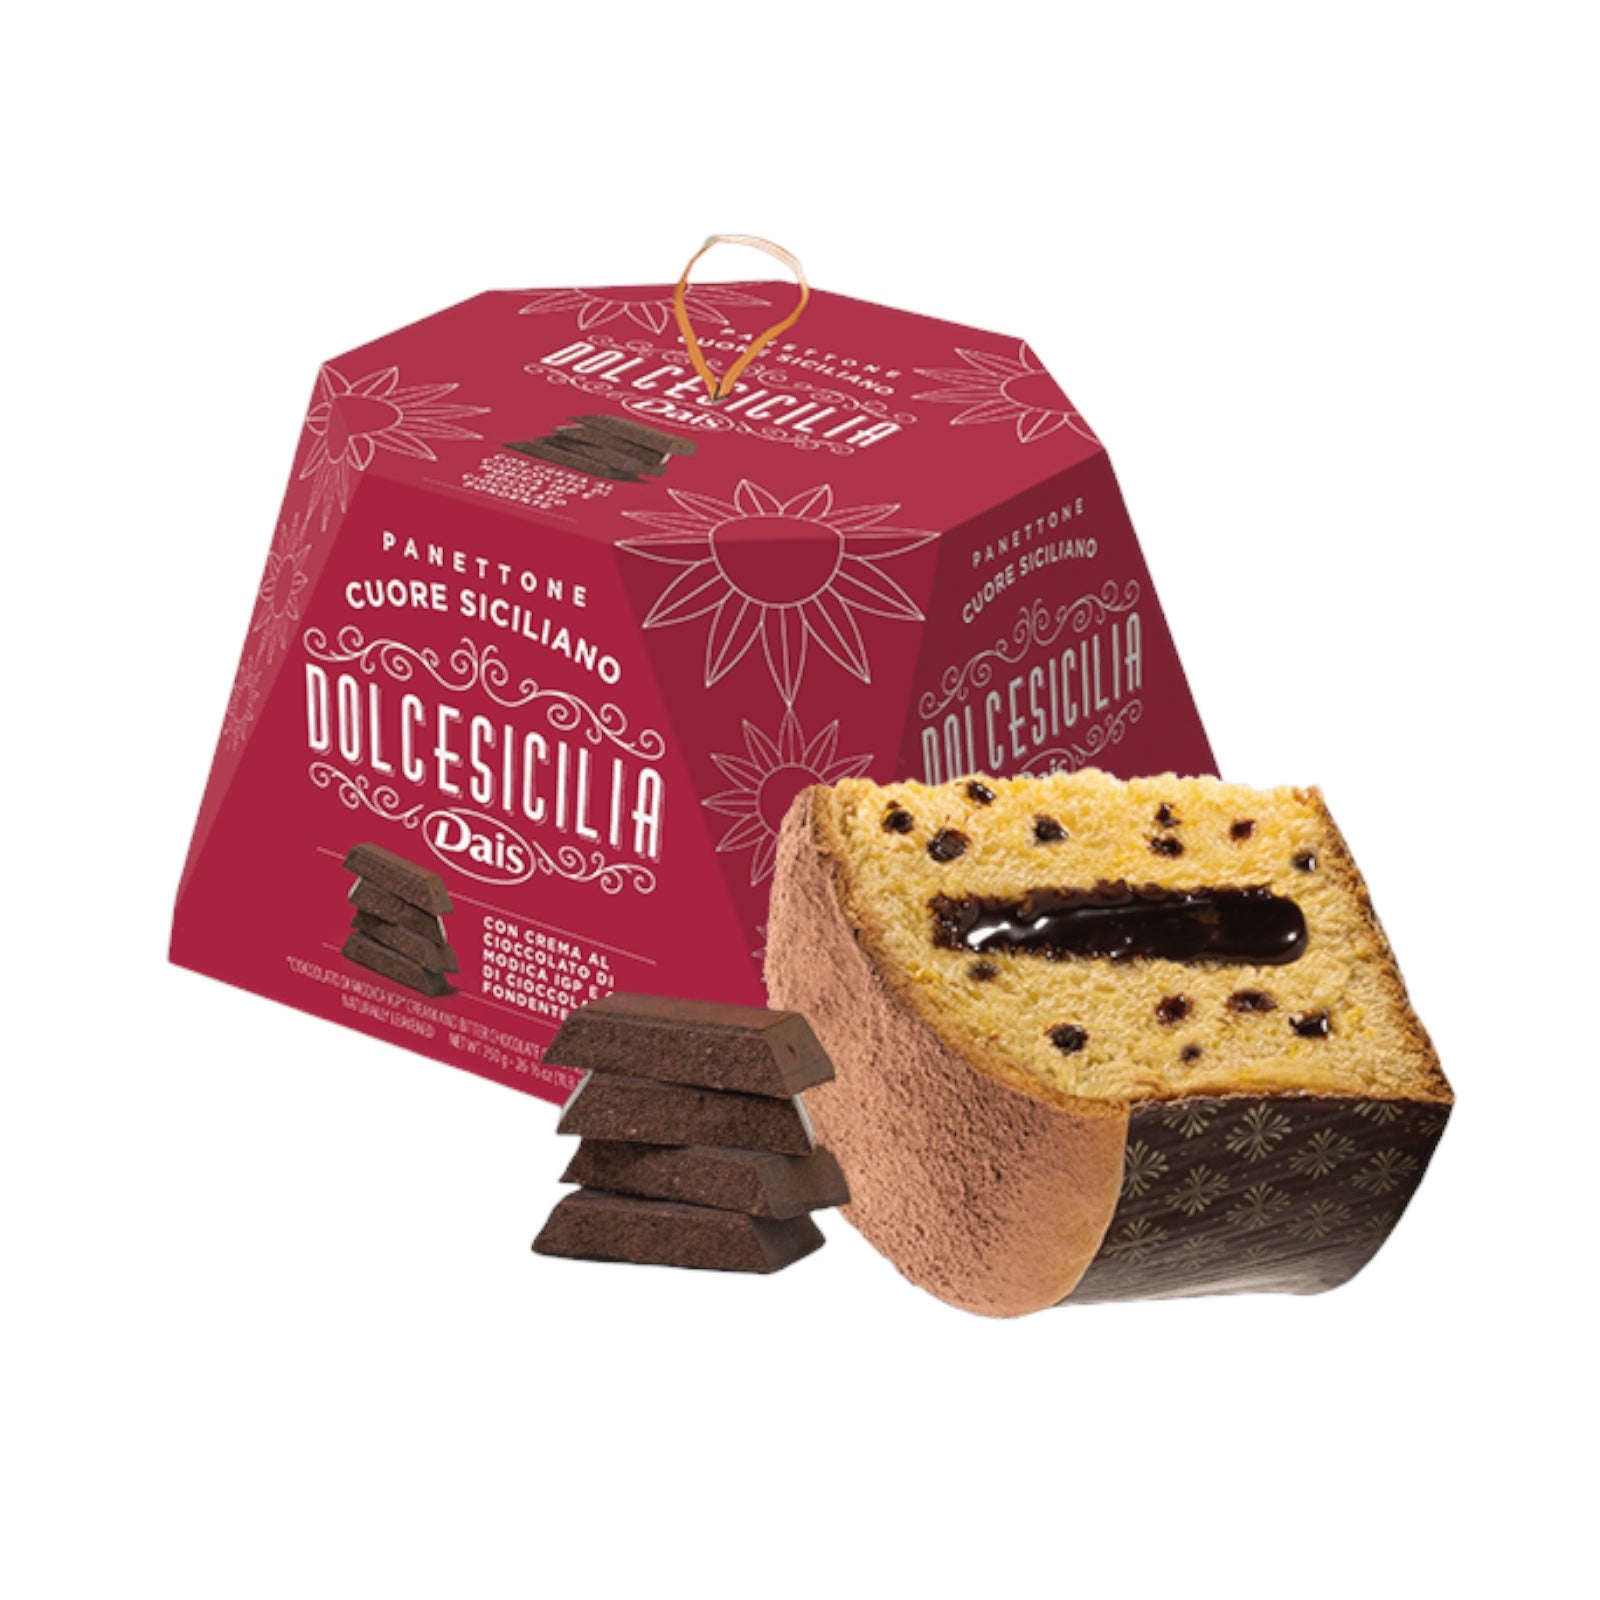 TRE MARIE PANETTONE MILANESE GR 1500